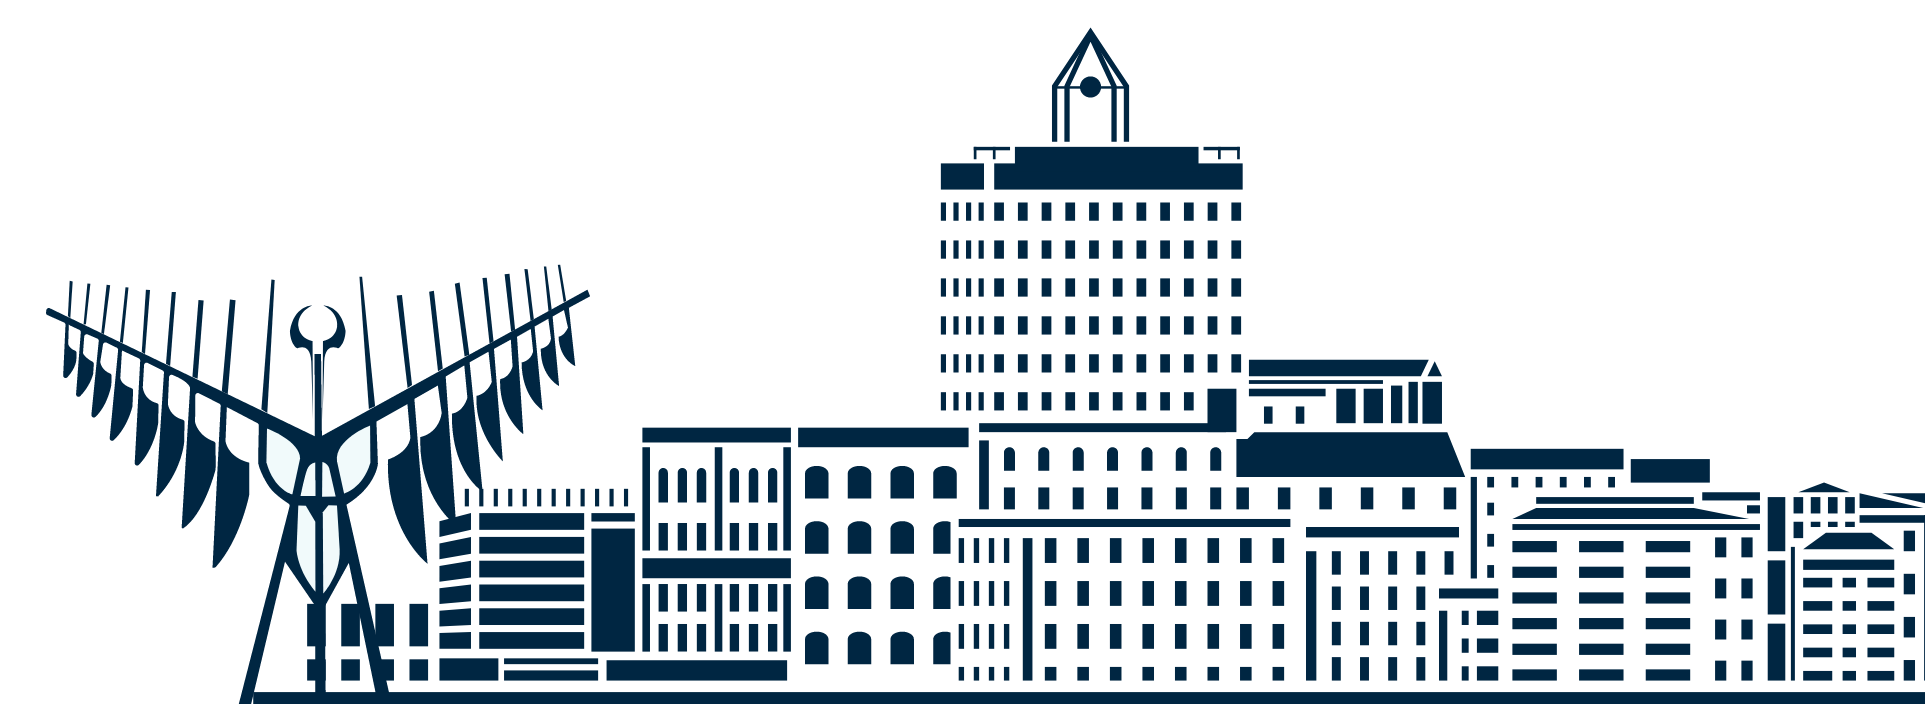 A graphic of the Barrie, Ontario skyline